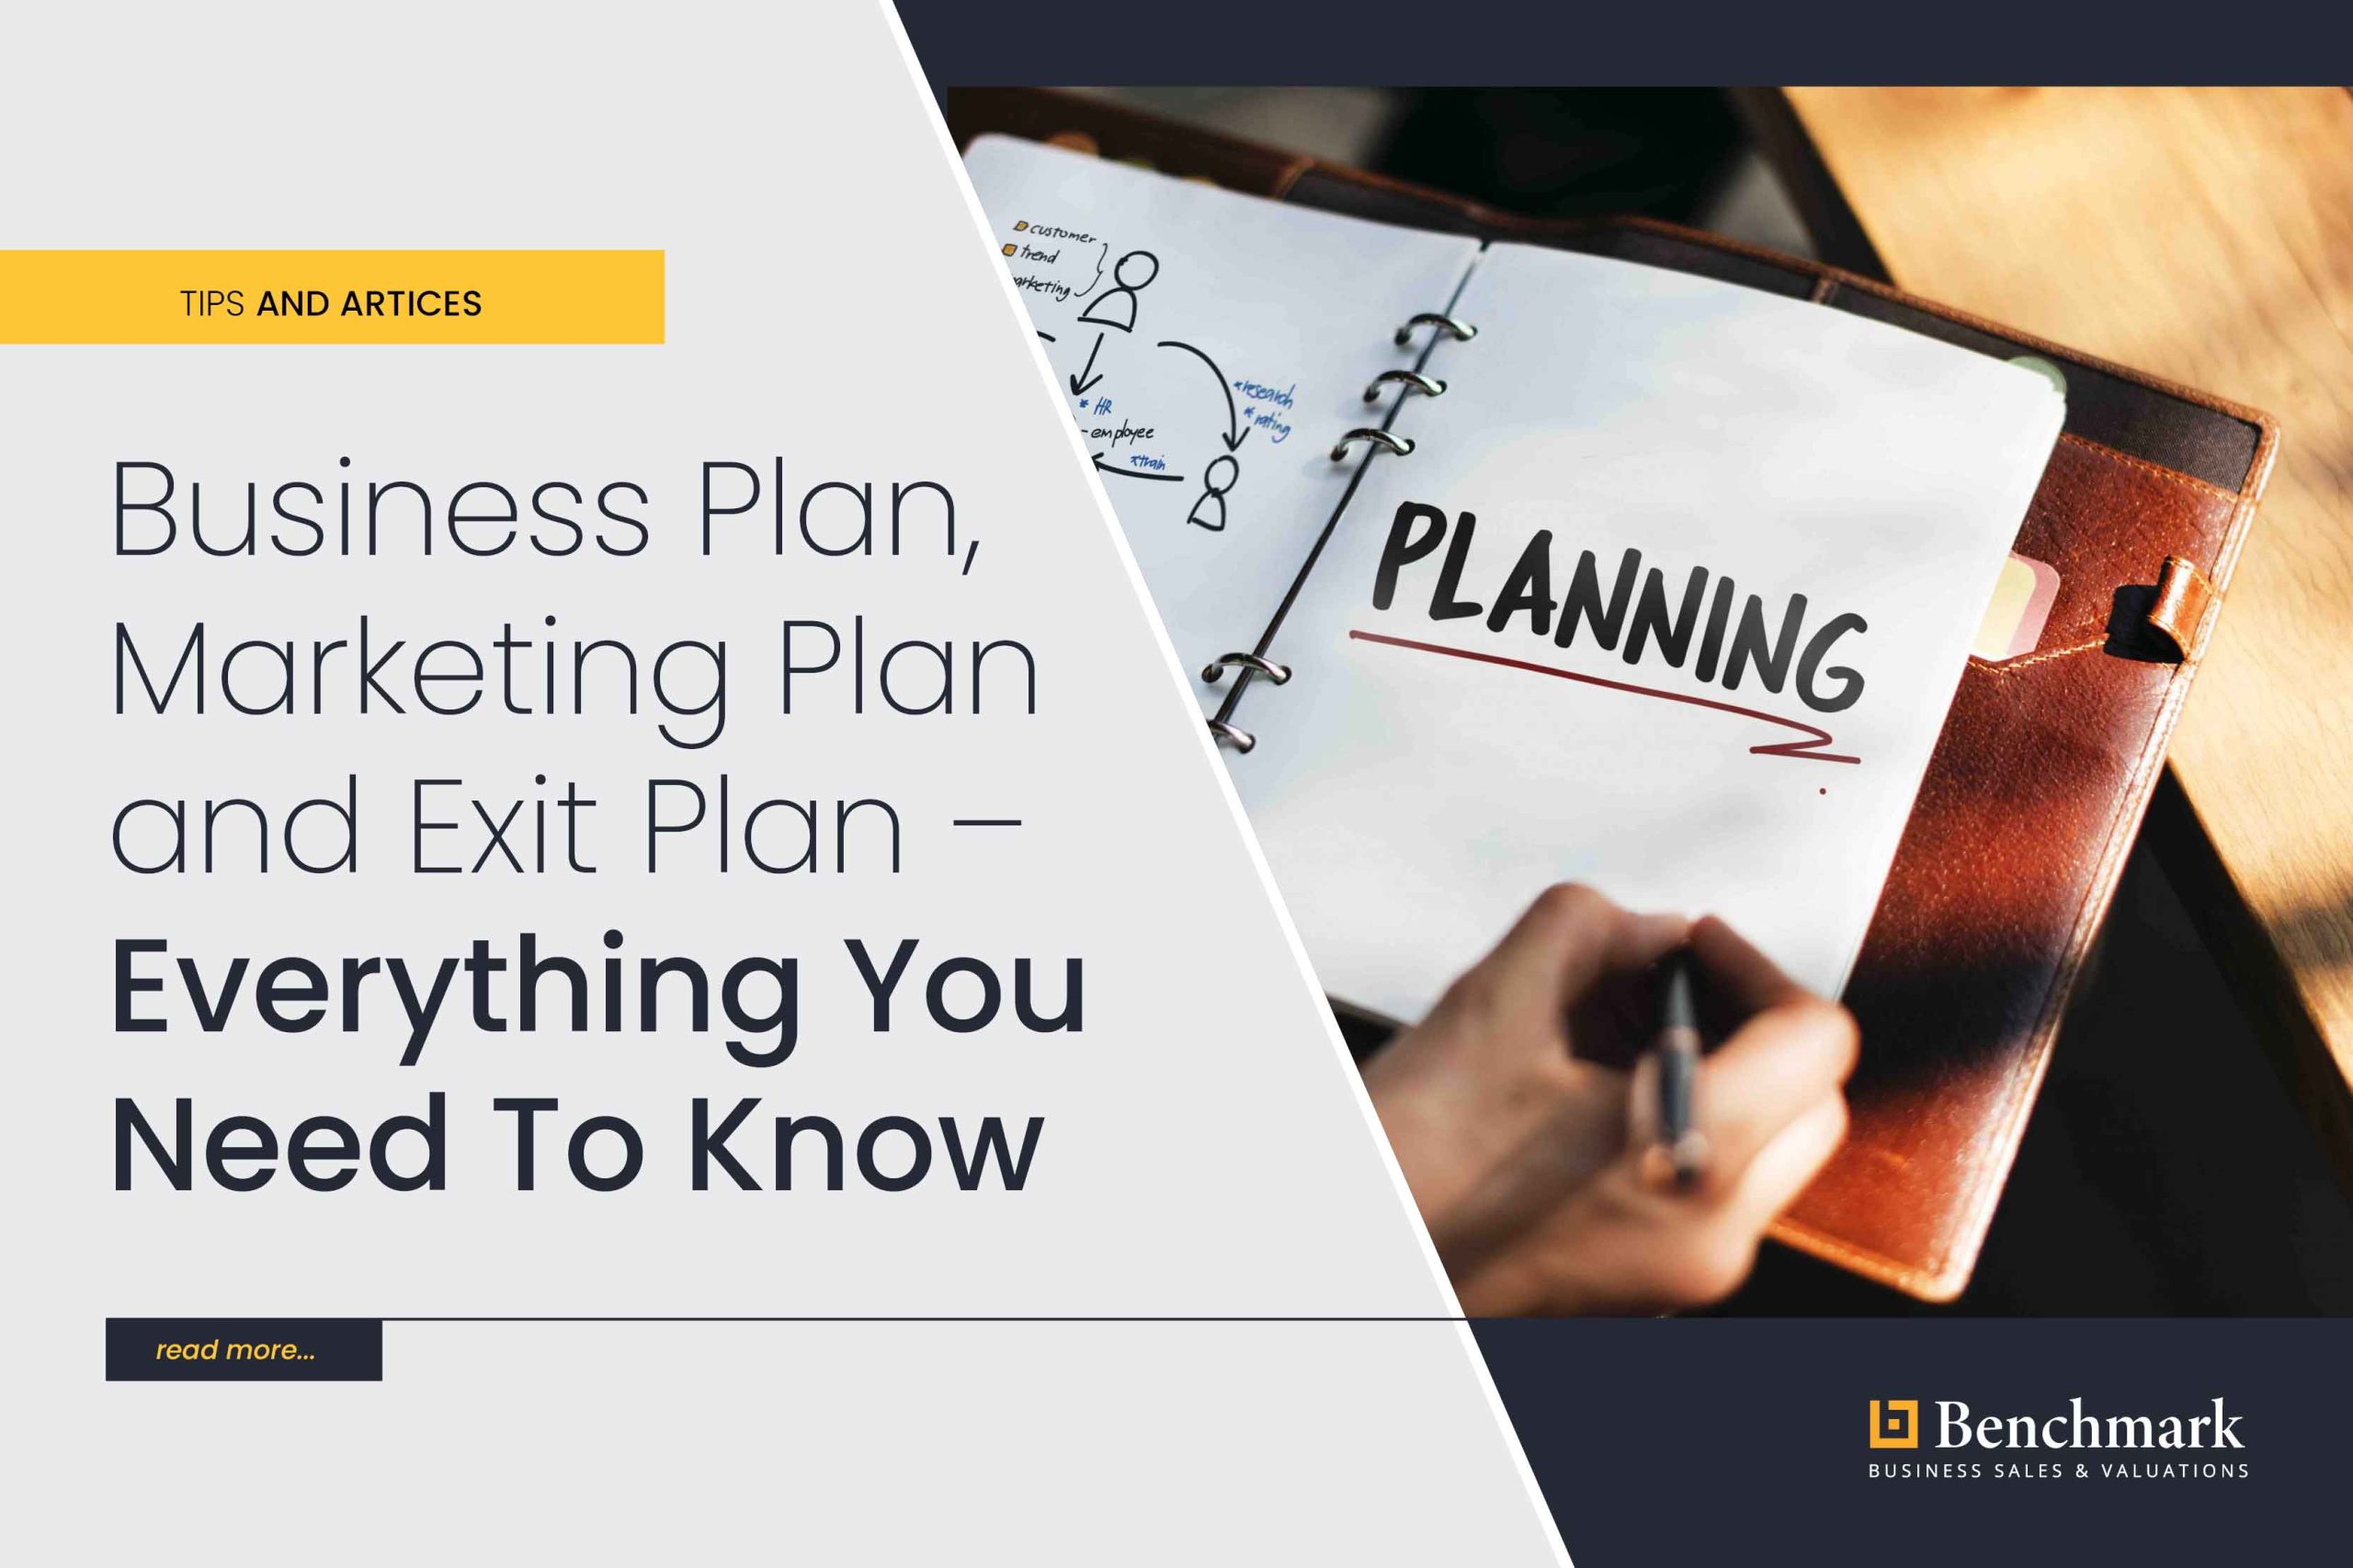 Business Plan, Marketing Plan and Exit Plan – everything you need to know